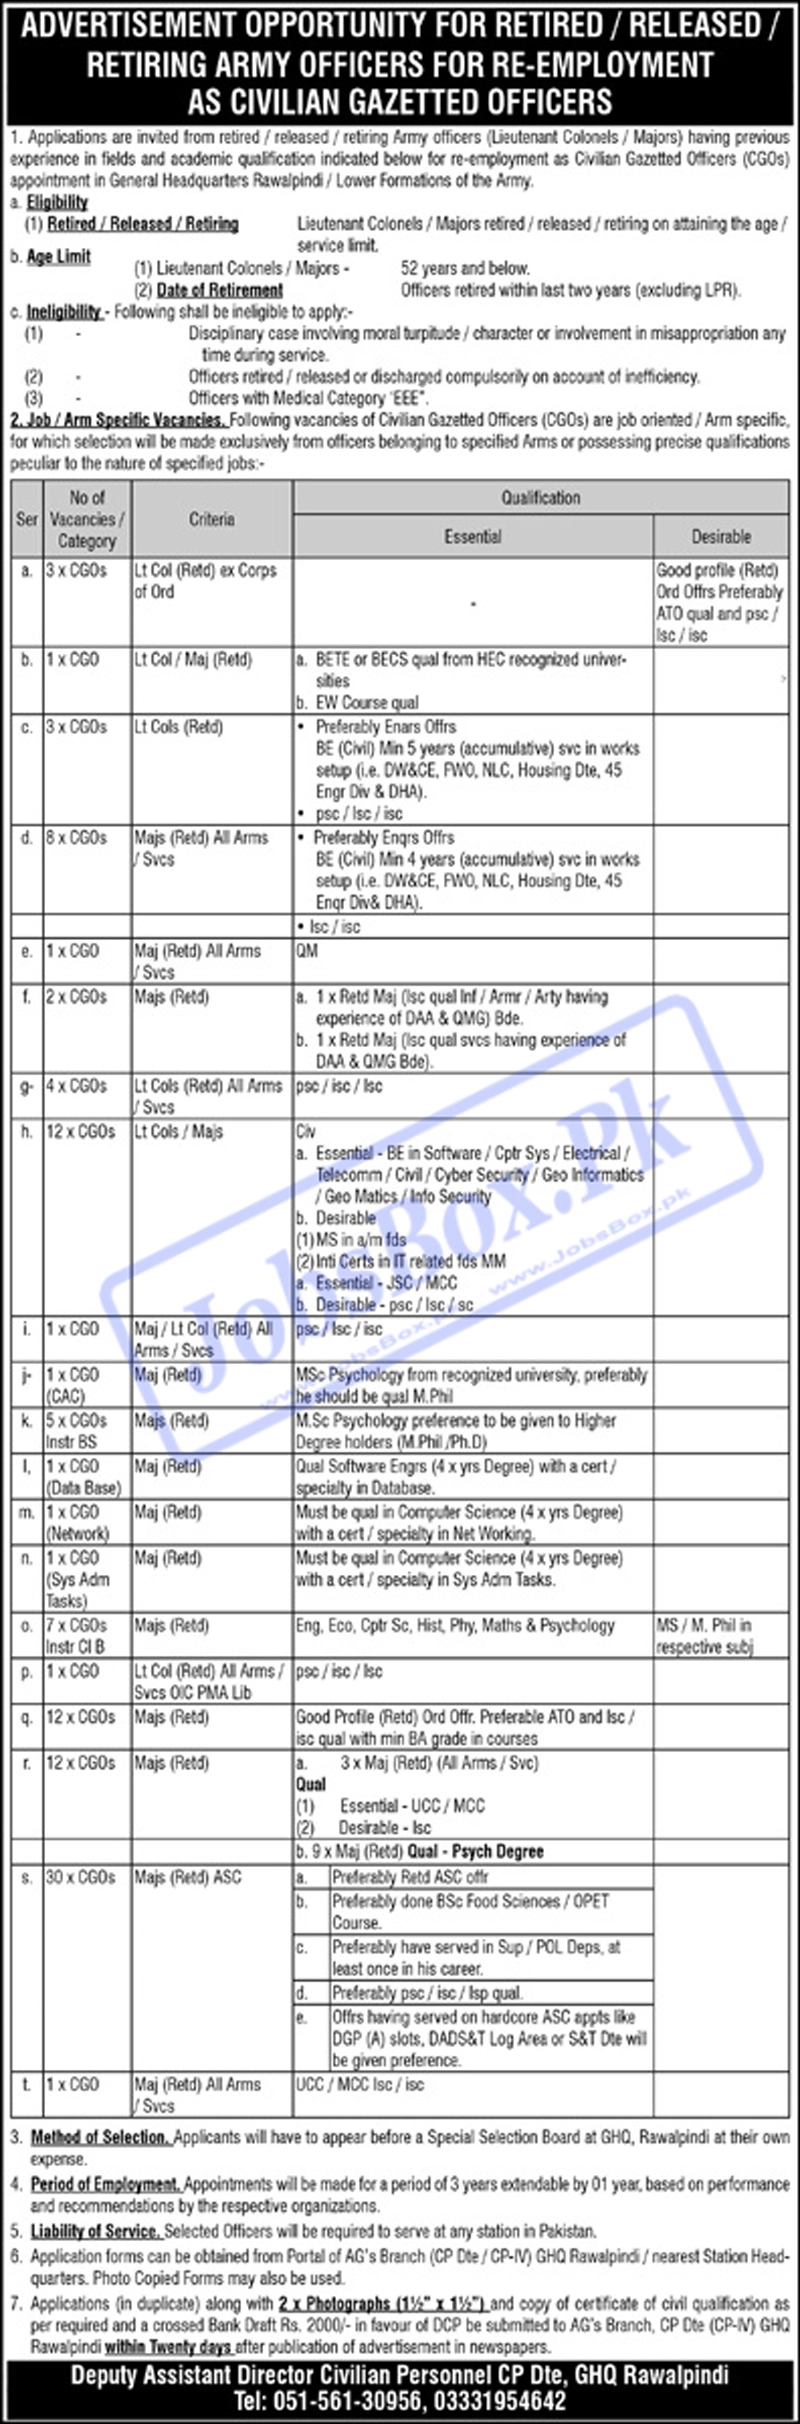 Pakistan Army Civilian Gazetted Officer Officers Jobs 2022